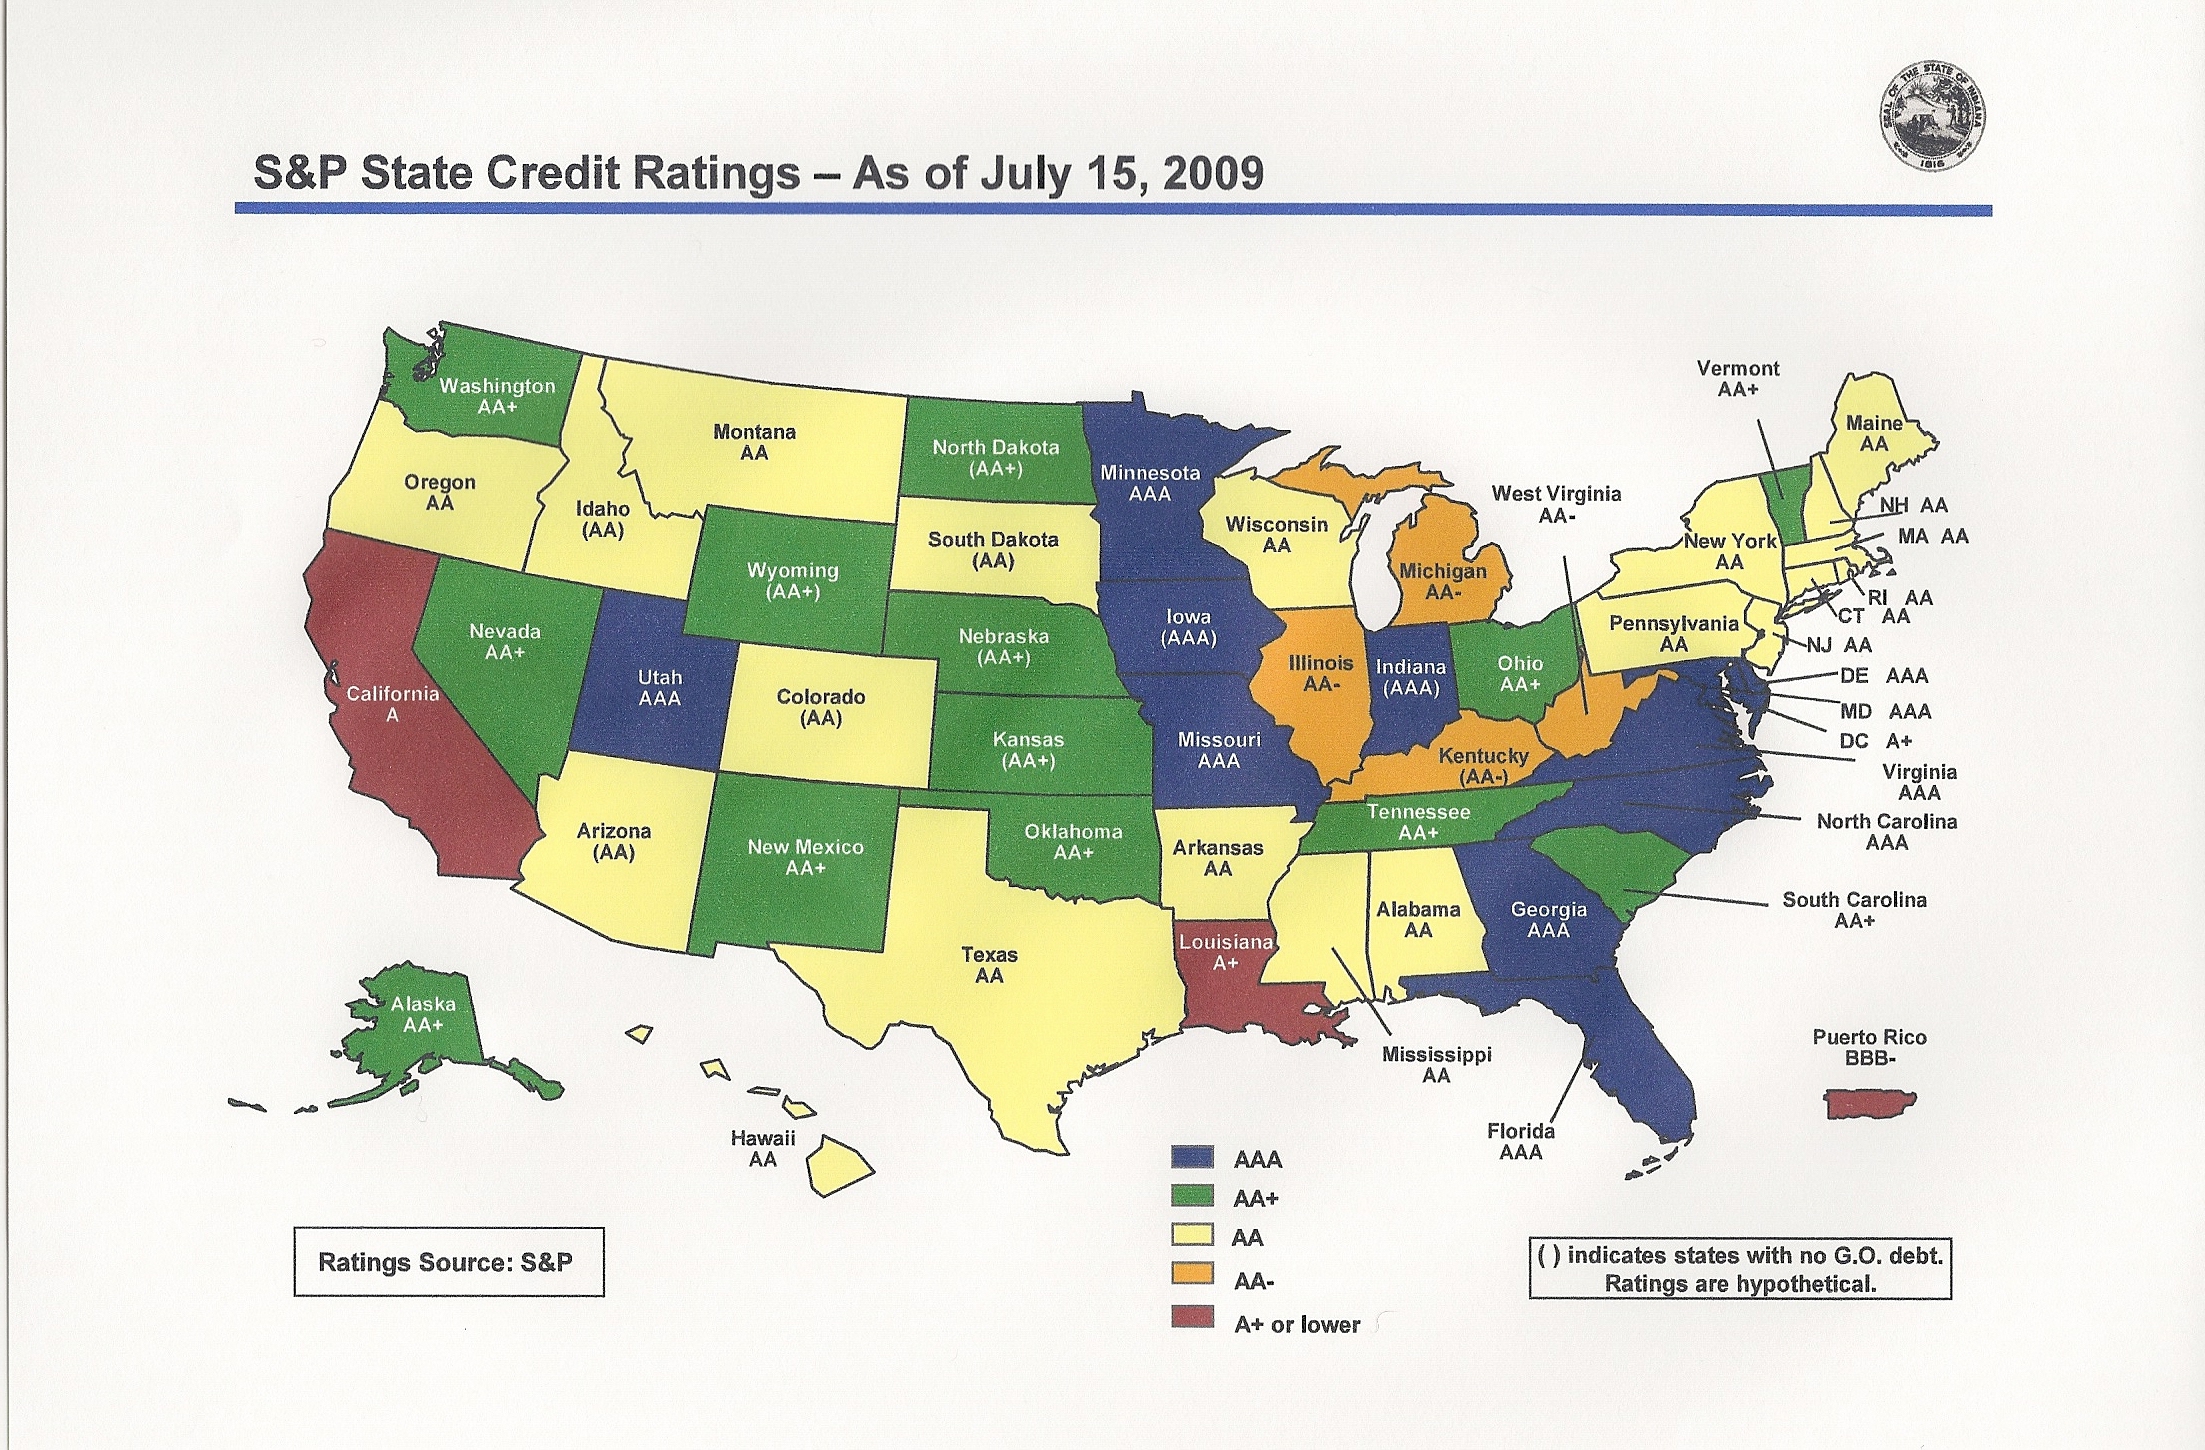 Standar and Poor's State Bond Ratings 2009